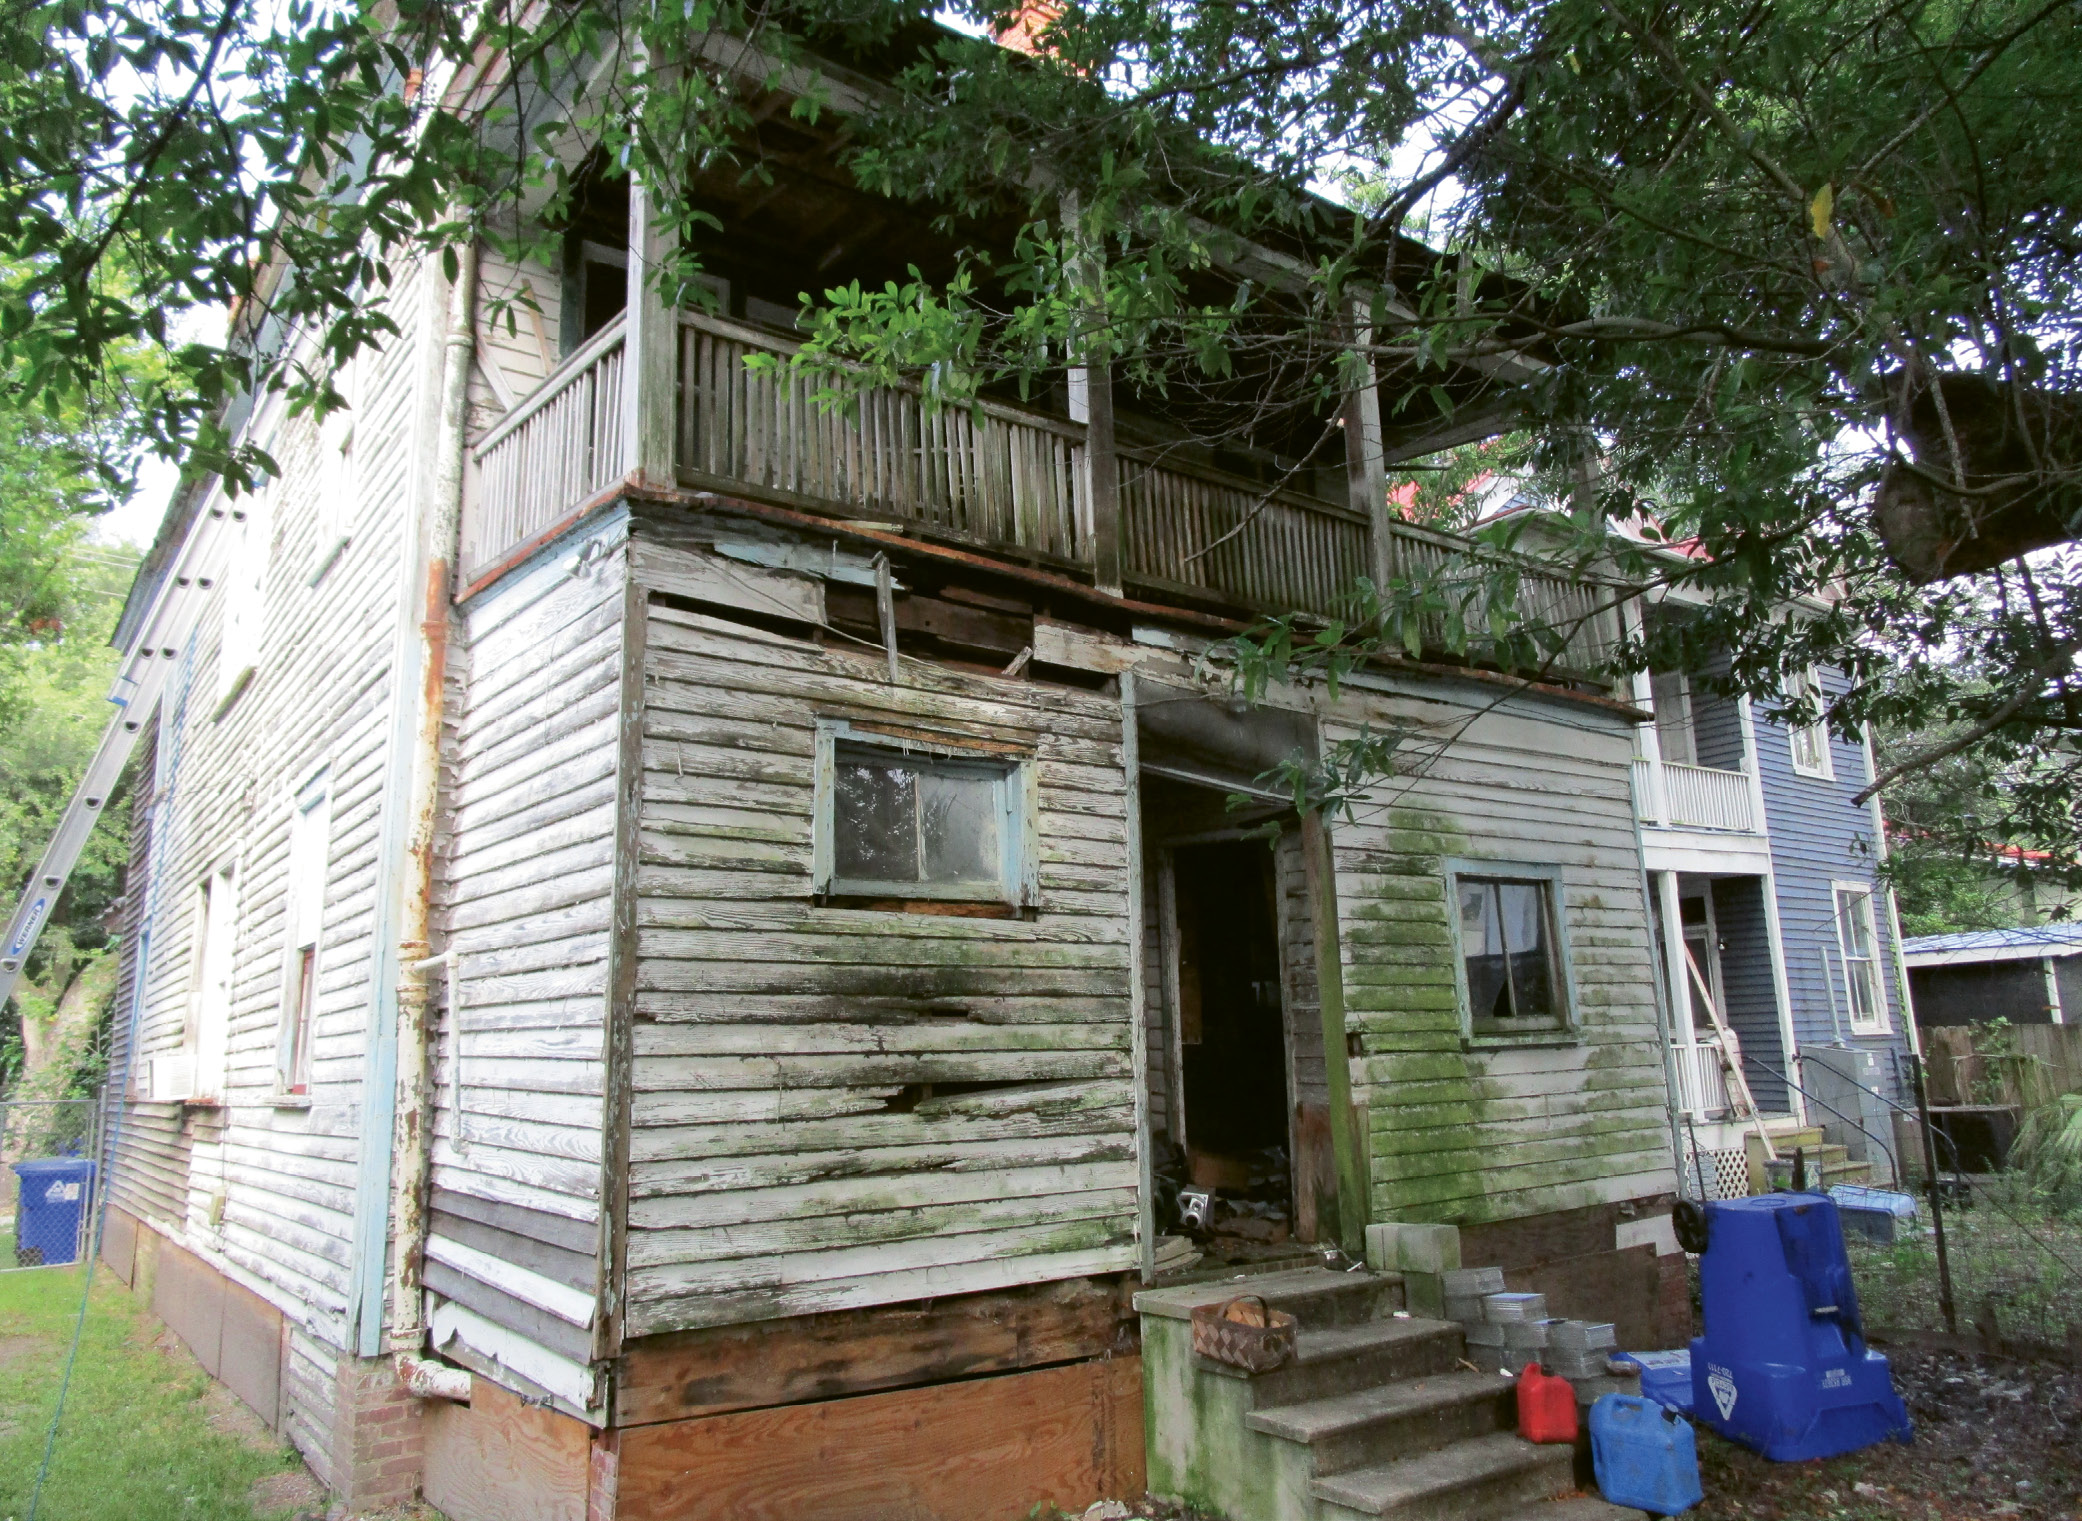 Before: During the renovation, the rotting back porch that had been closed in at some point was removed from the rear facade.